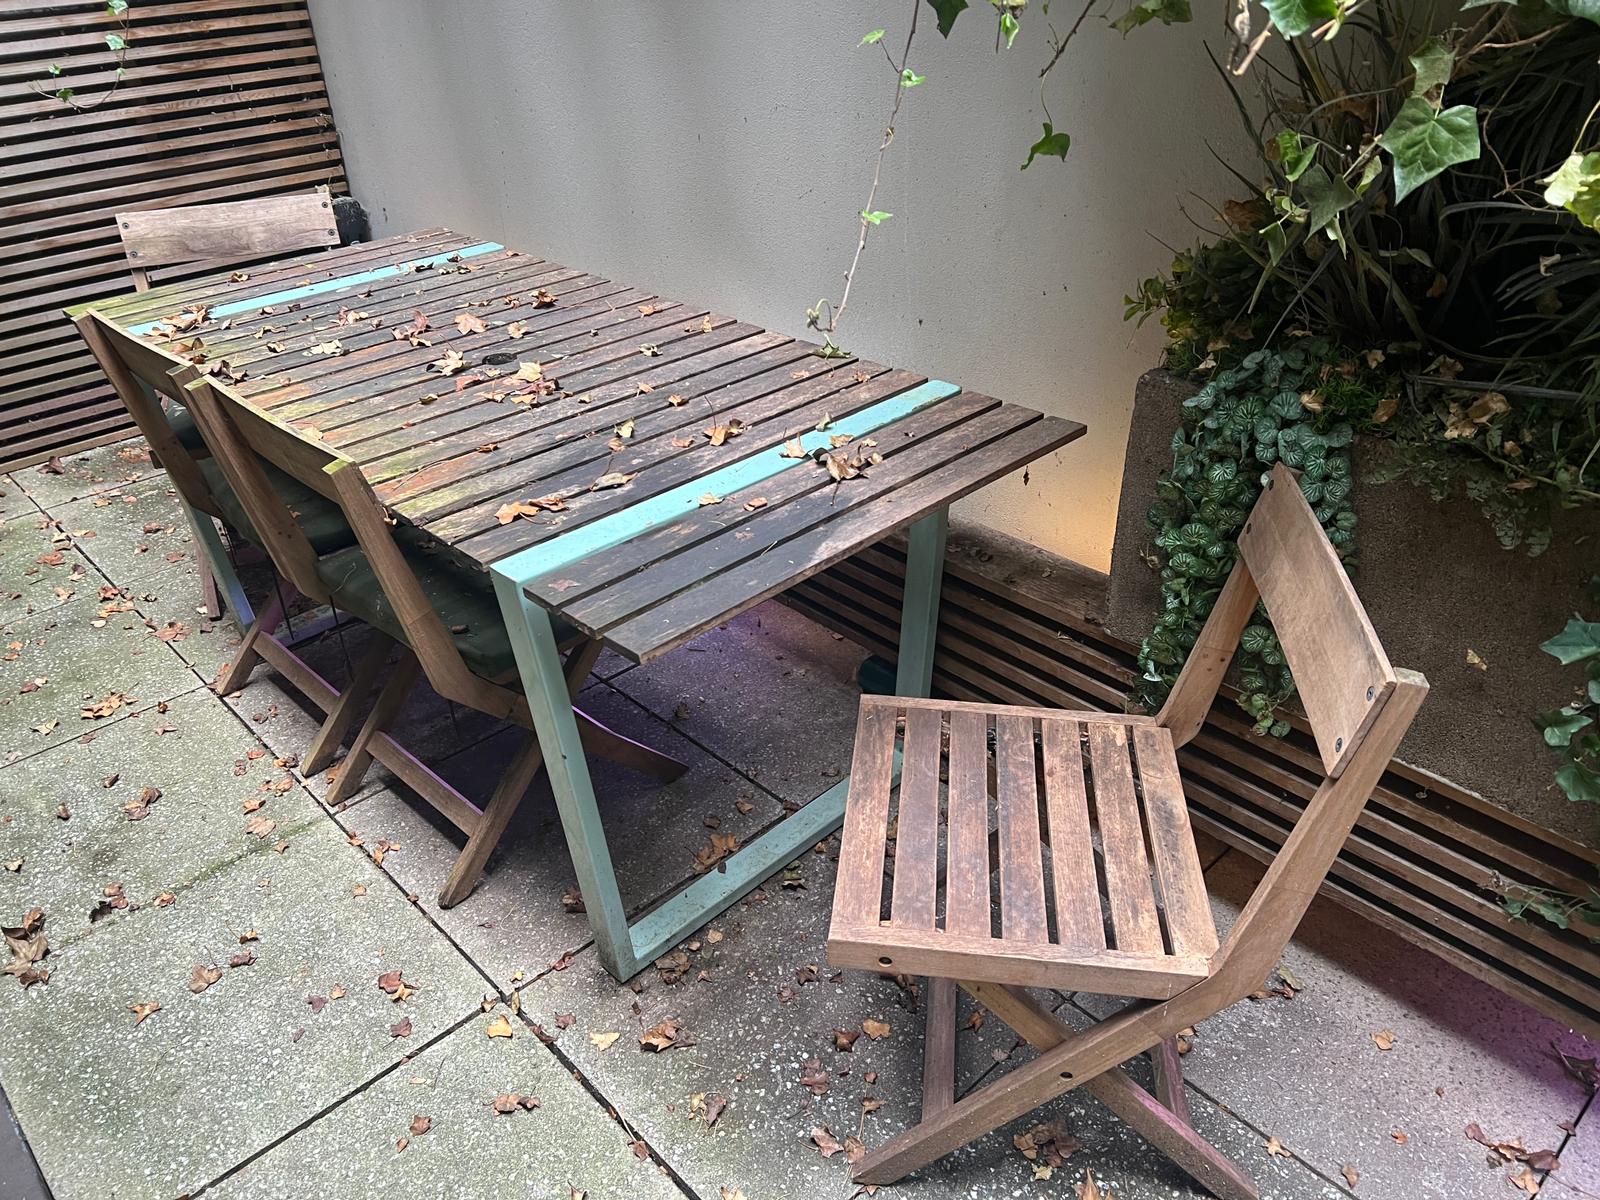 A garden table with four slatted folding chairs, the table with slatted top and aqua metal frame (